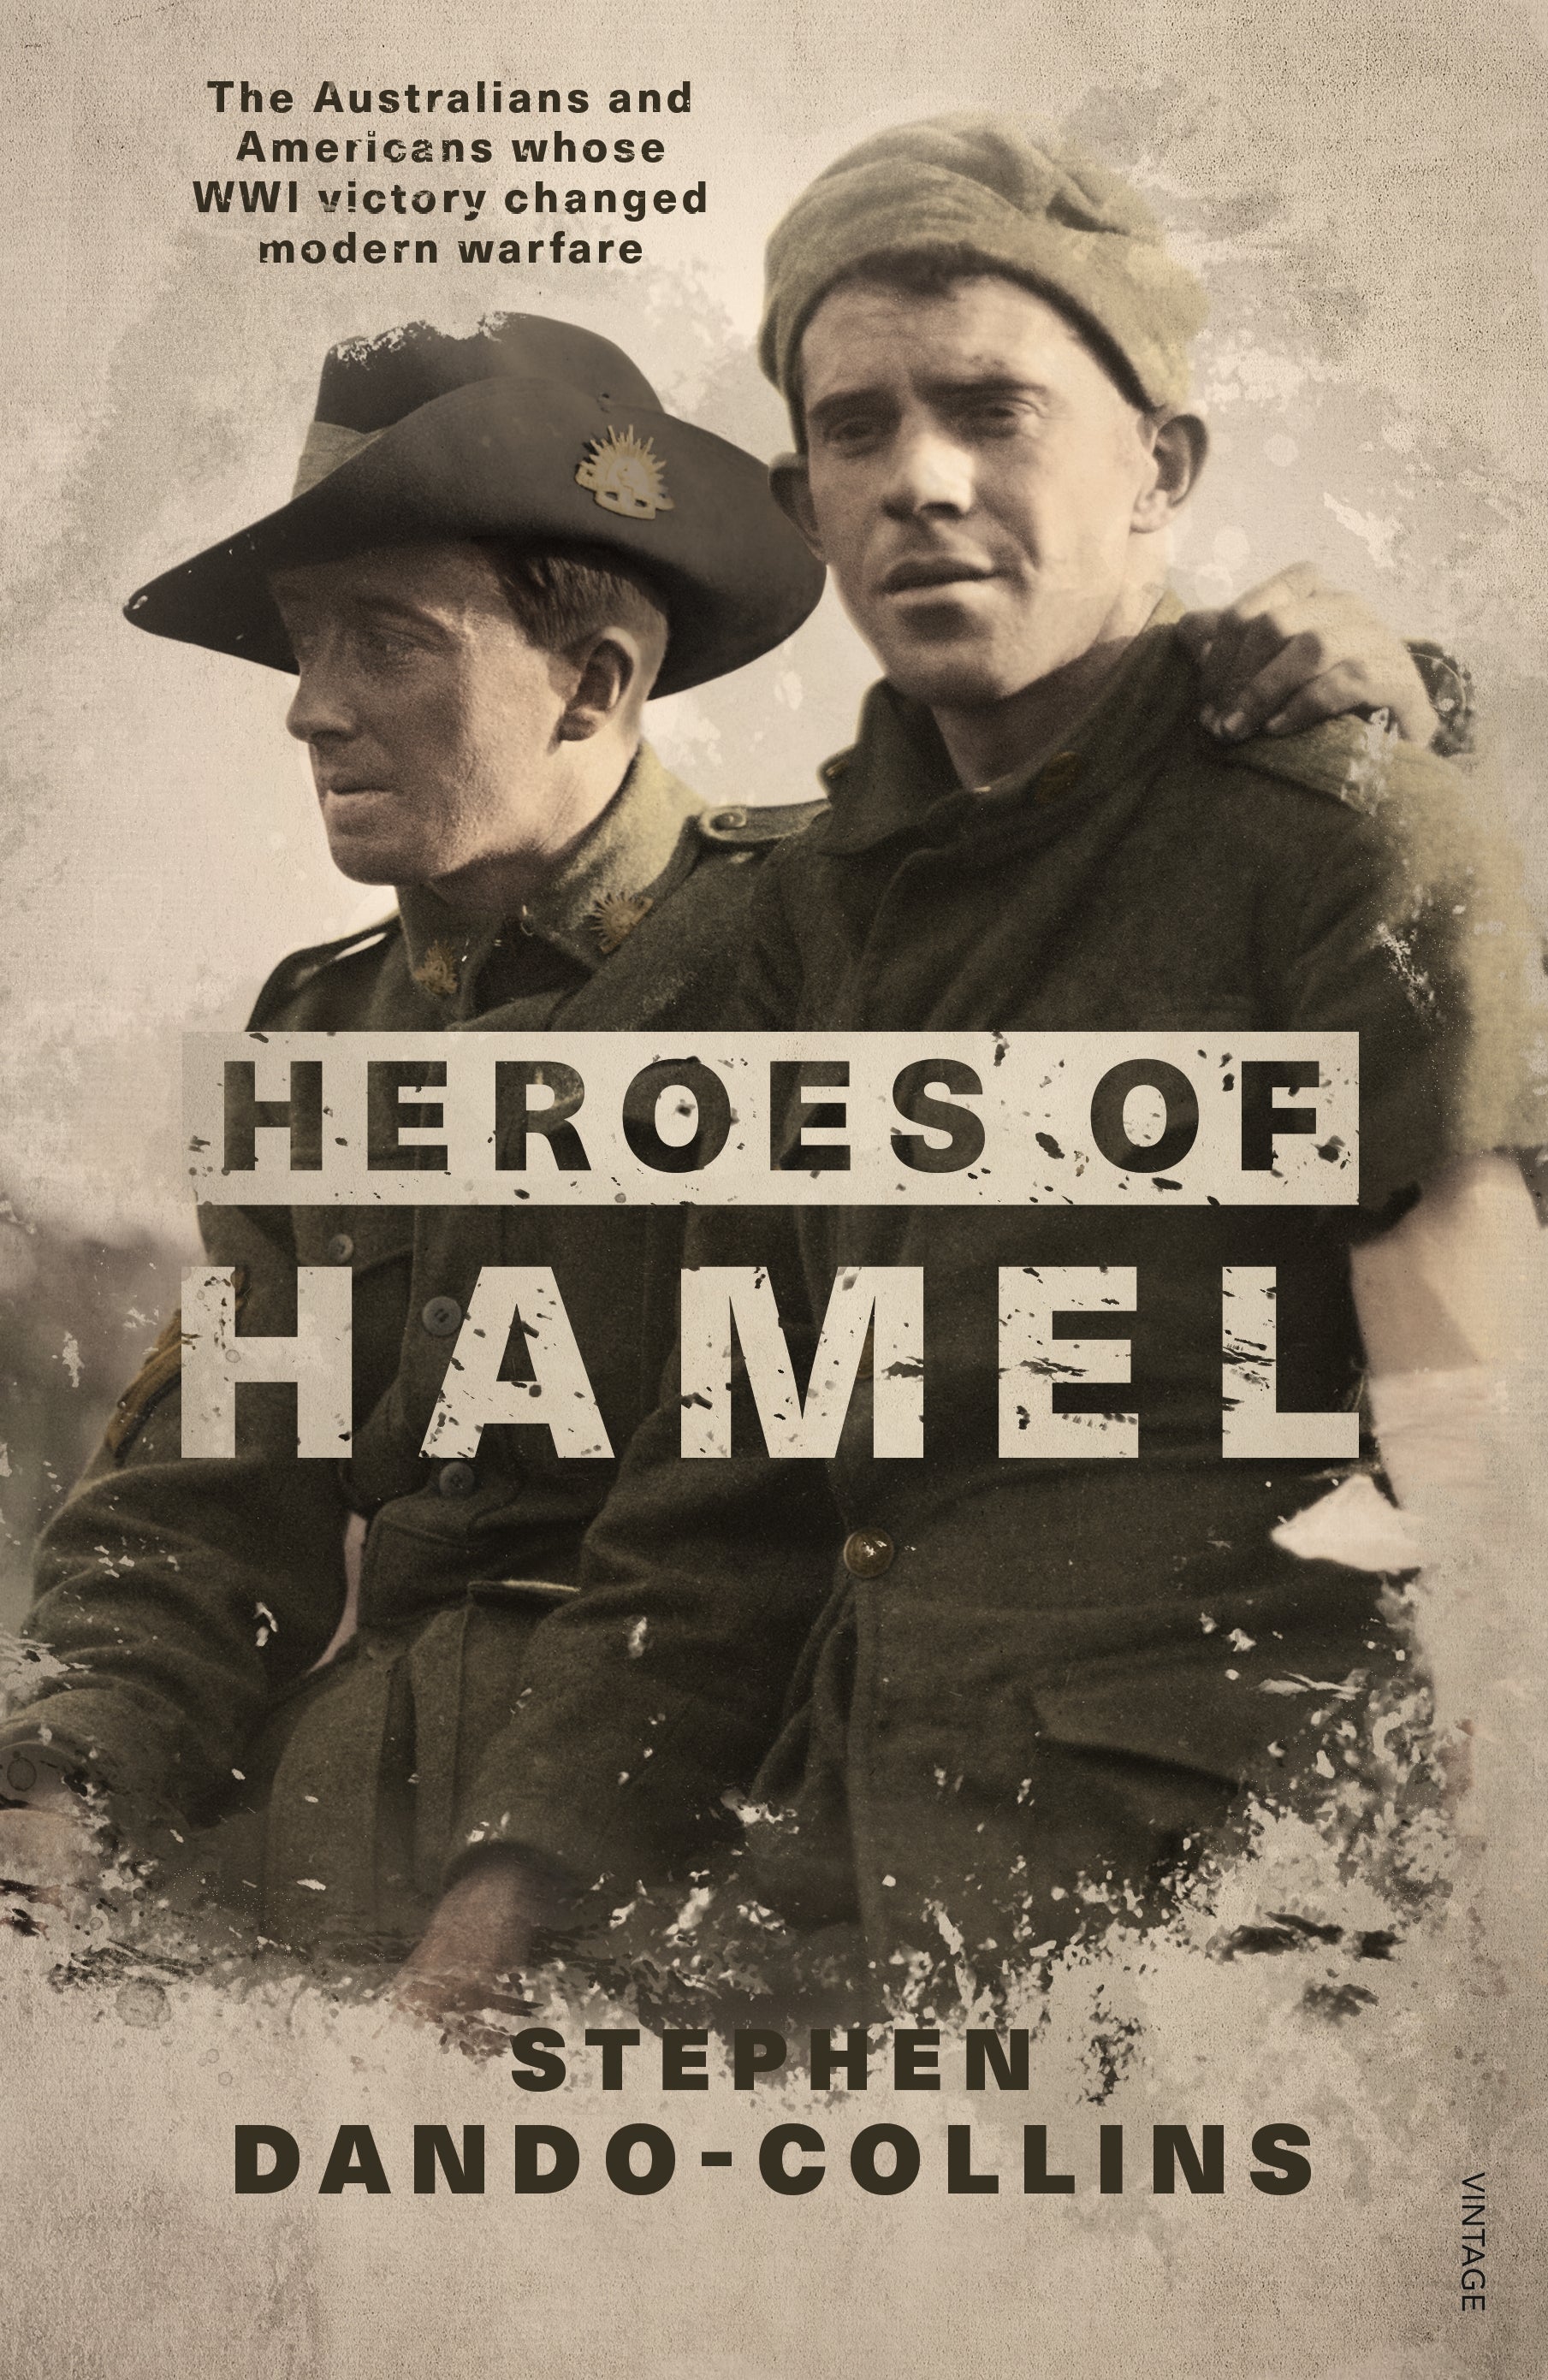 Heroes of Hamel: The Australians and Americans Whose WWI Victory Changed Modern Warfare